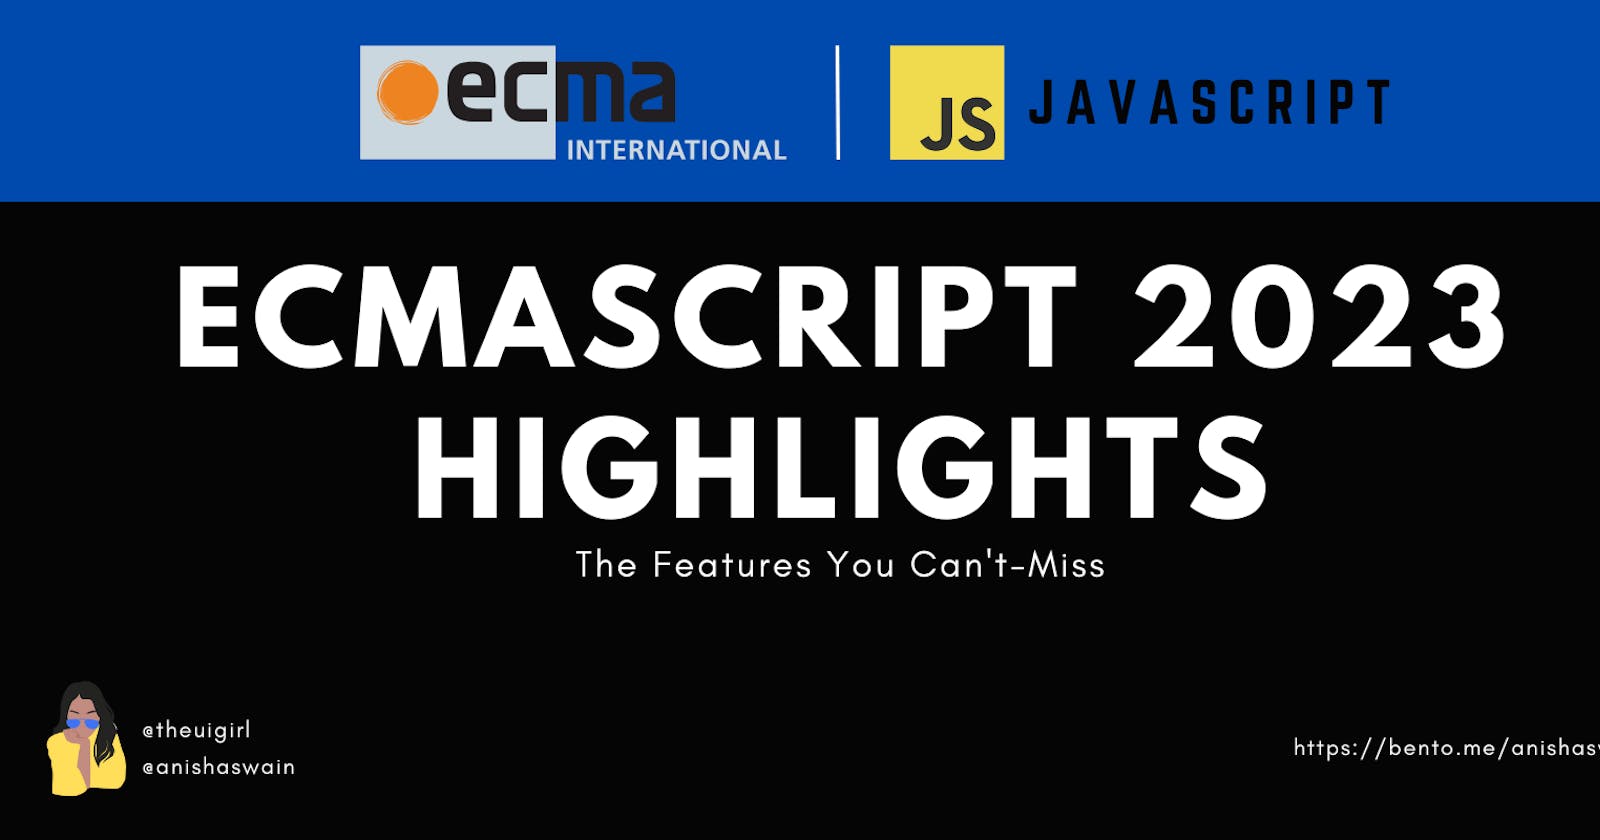 ECMAScript 2023 Highlights | The Features You Can't-Miss